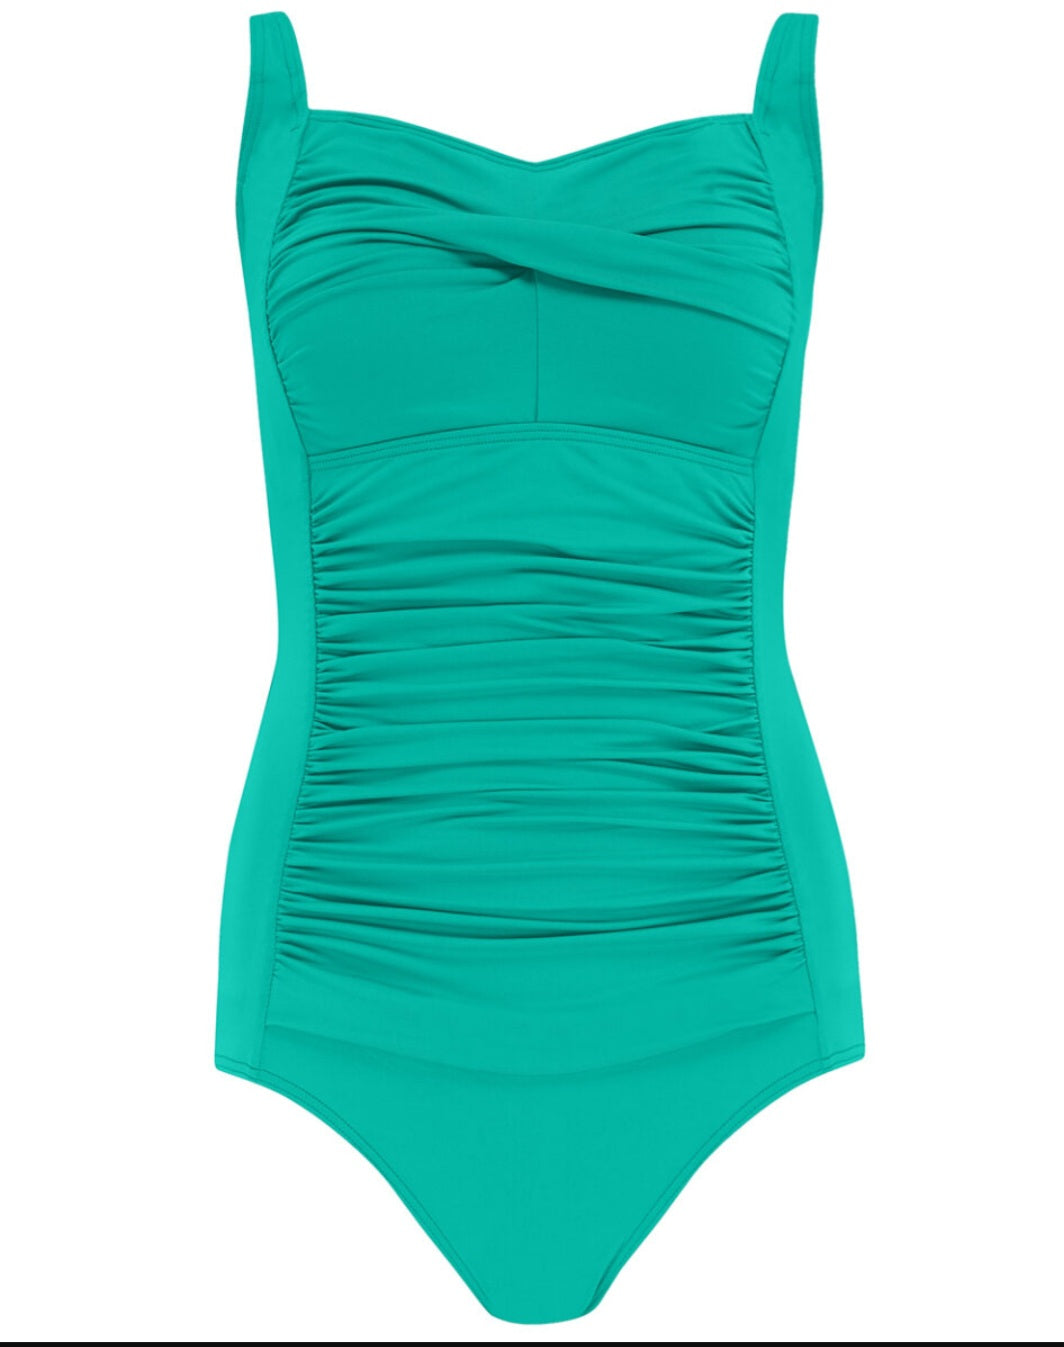 Green ruched swimsuit